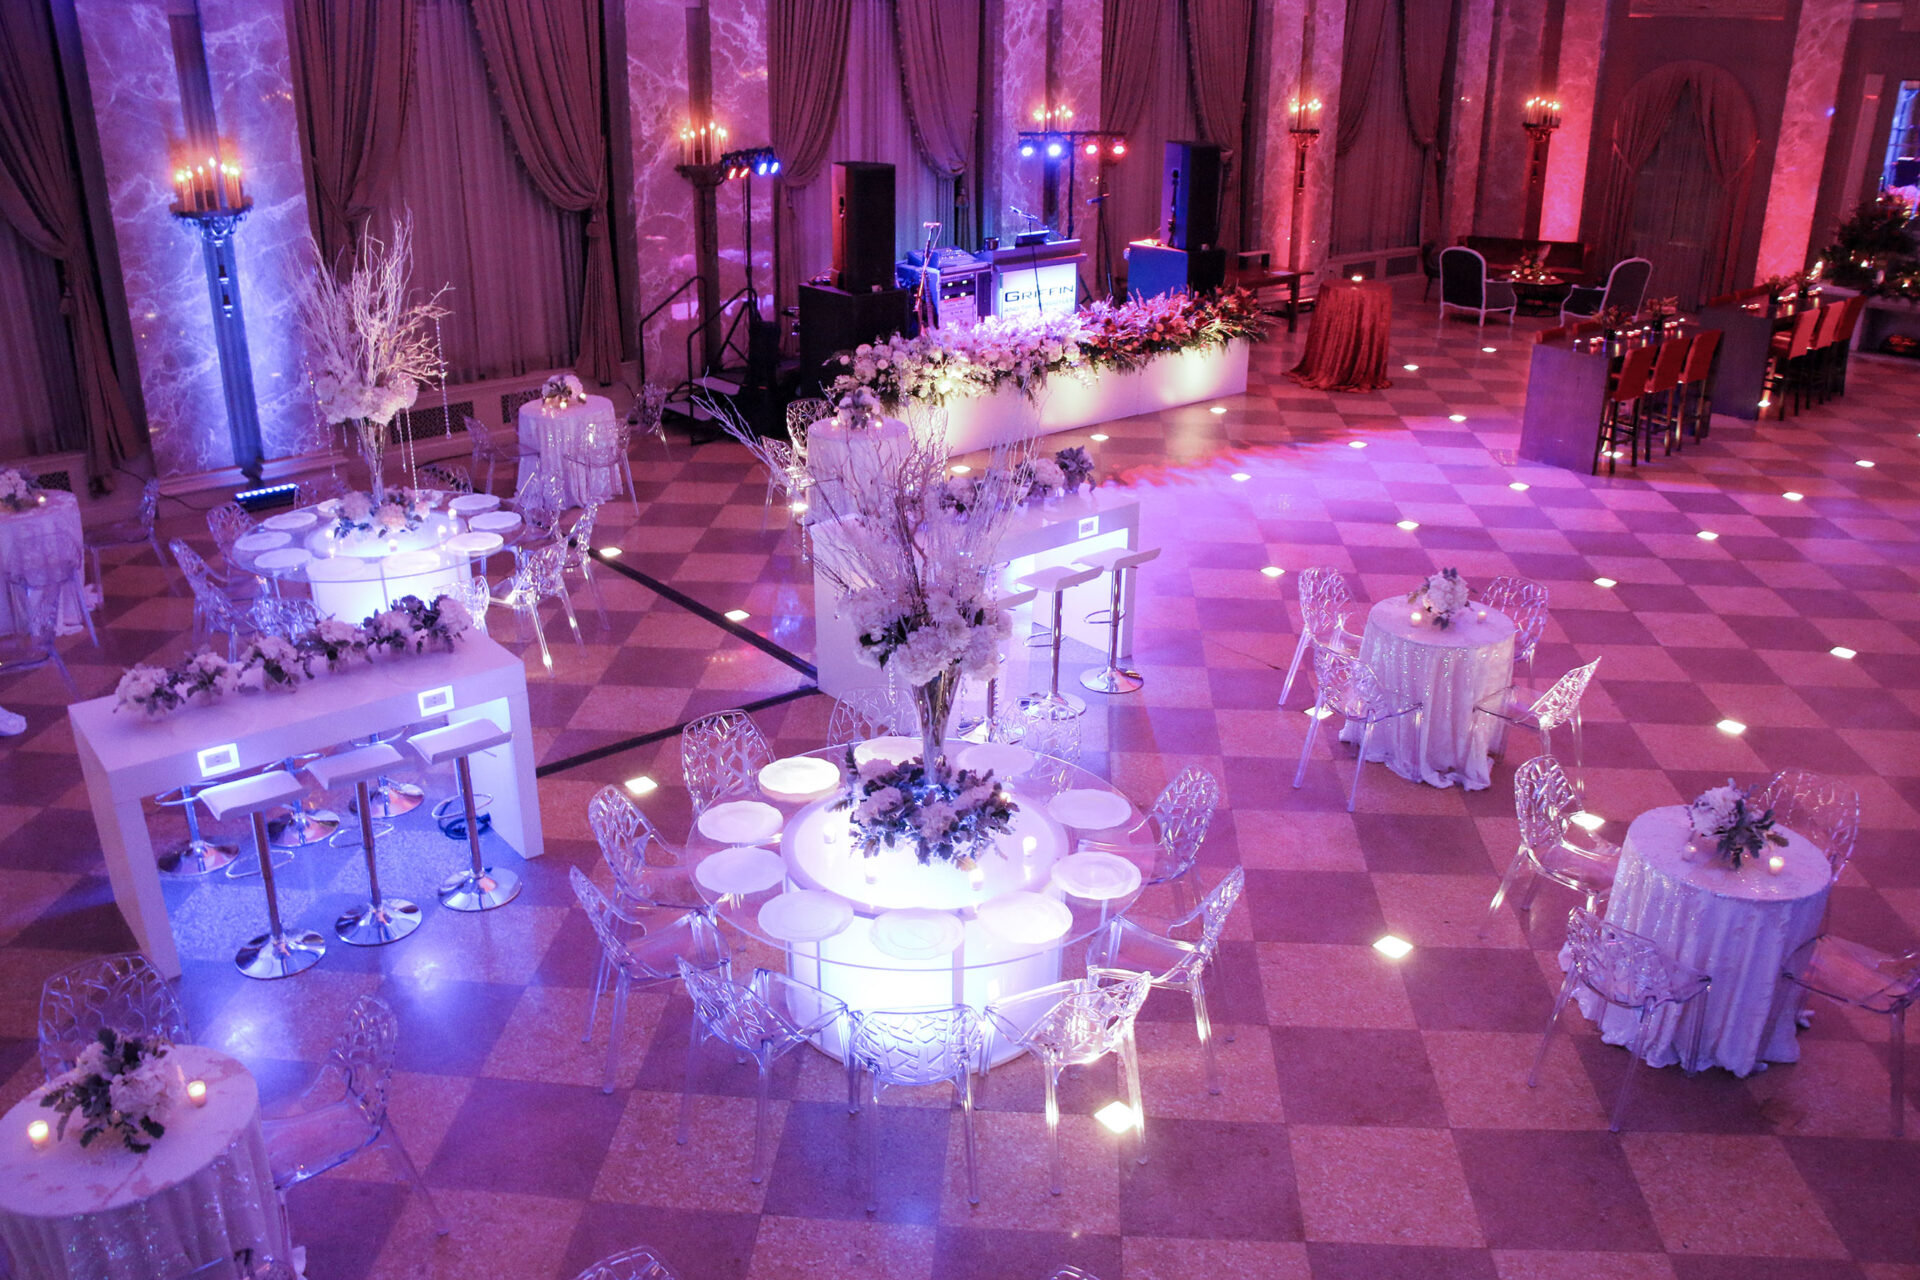 View from above of tables set up for a wedding within a spacious purple-lit ballroom